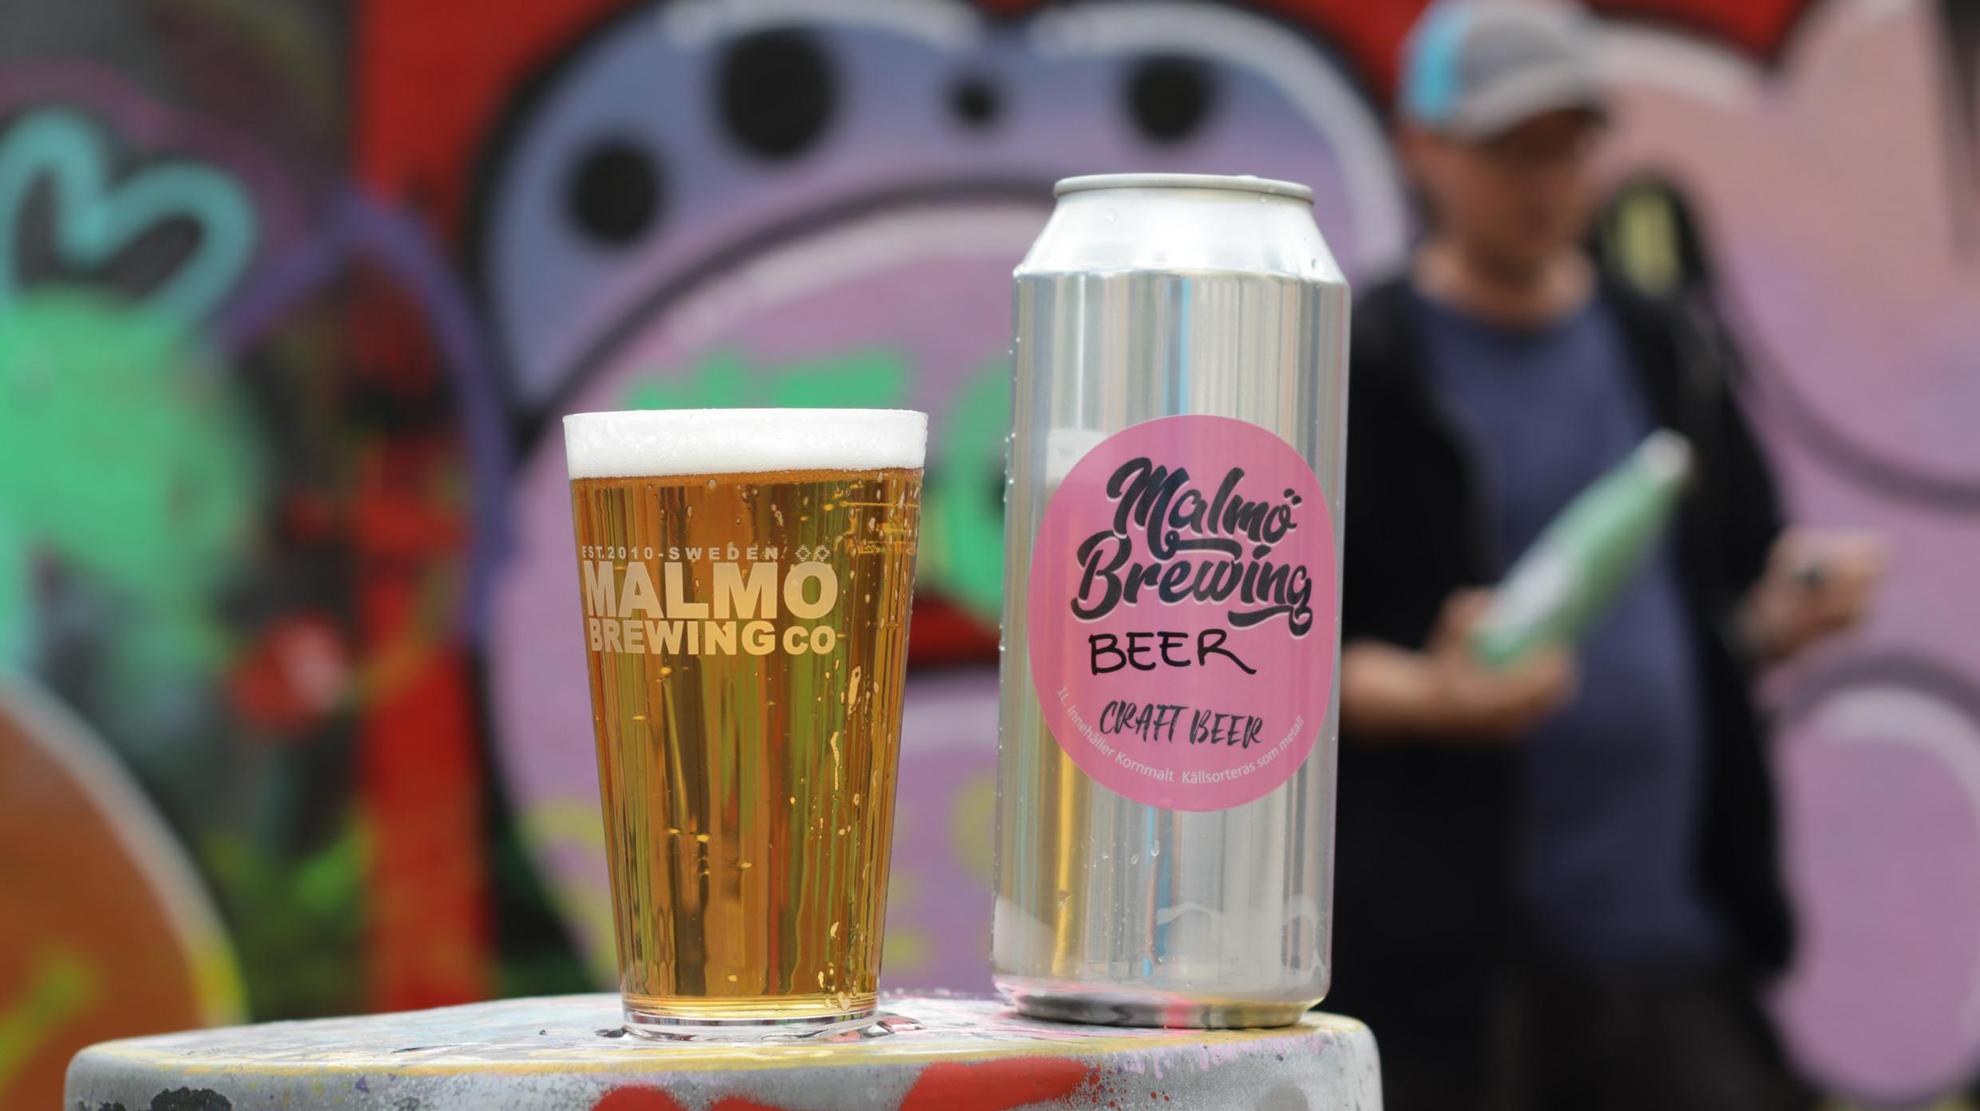 A beer can and a glass filled with beer. Out of focus in the background is a person and a graffiti wall.